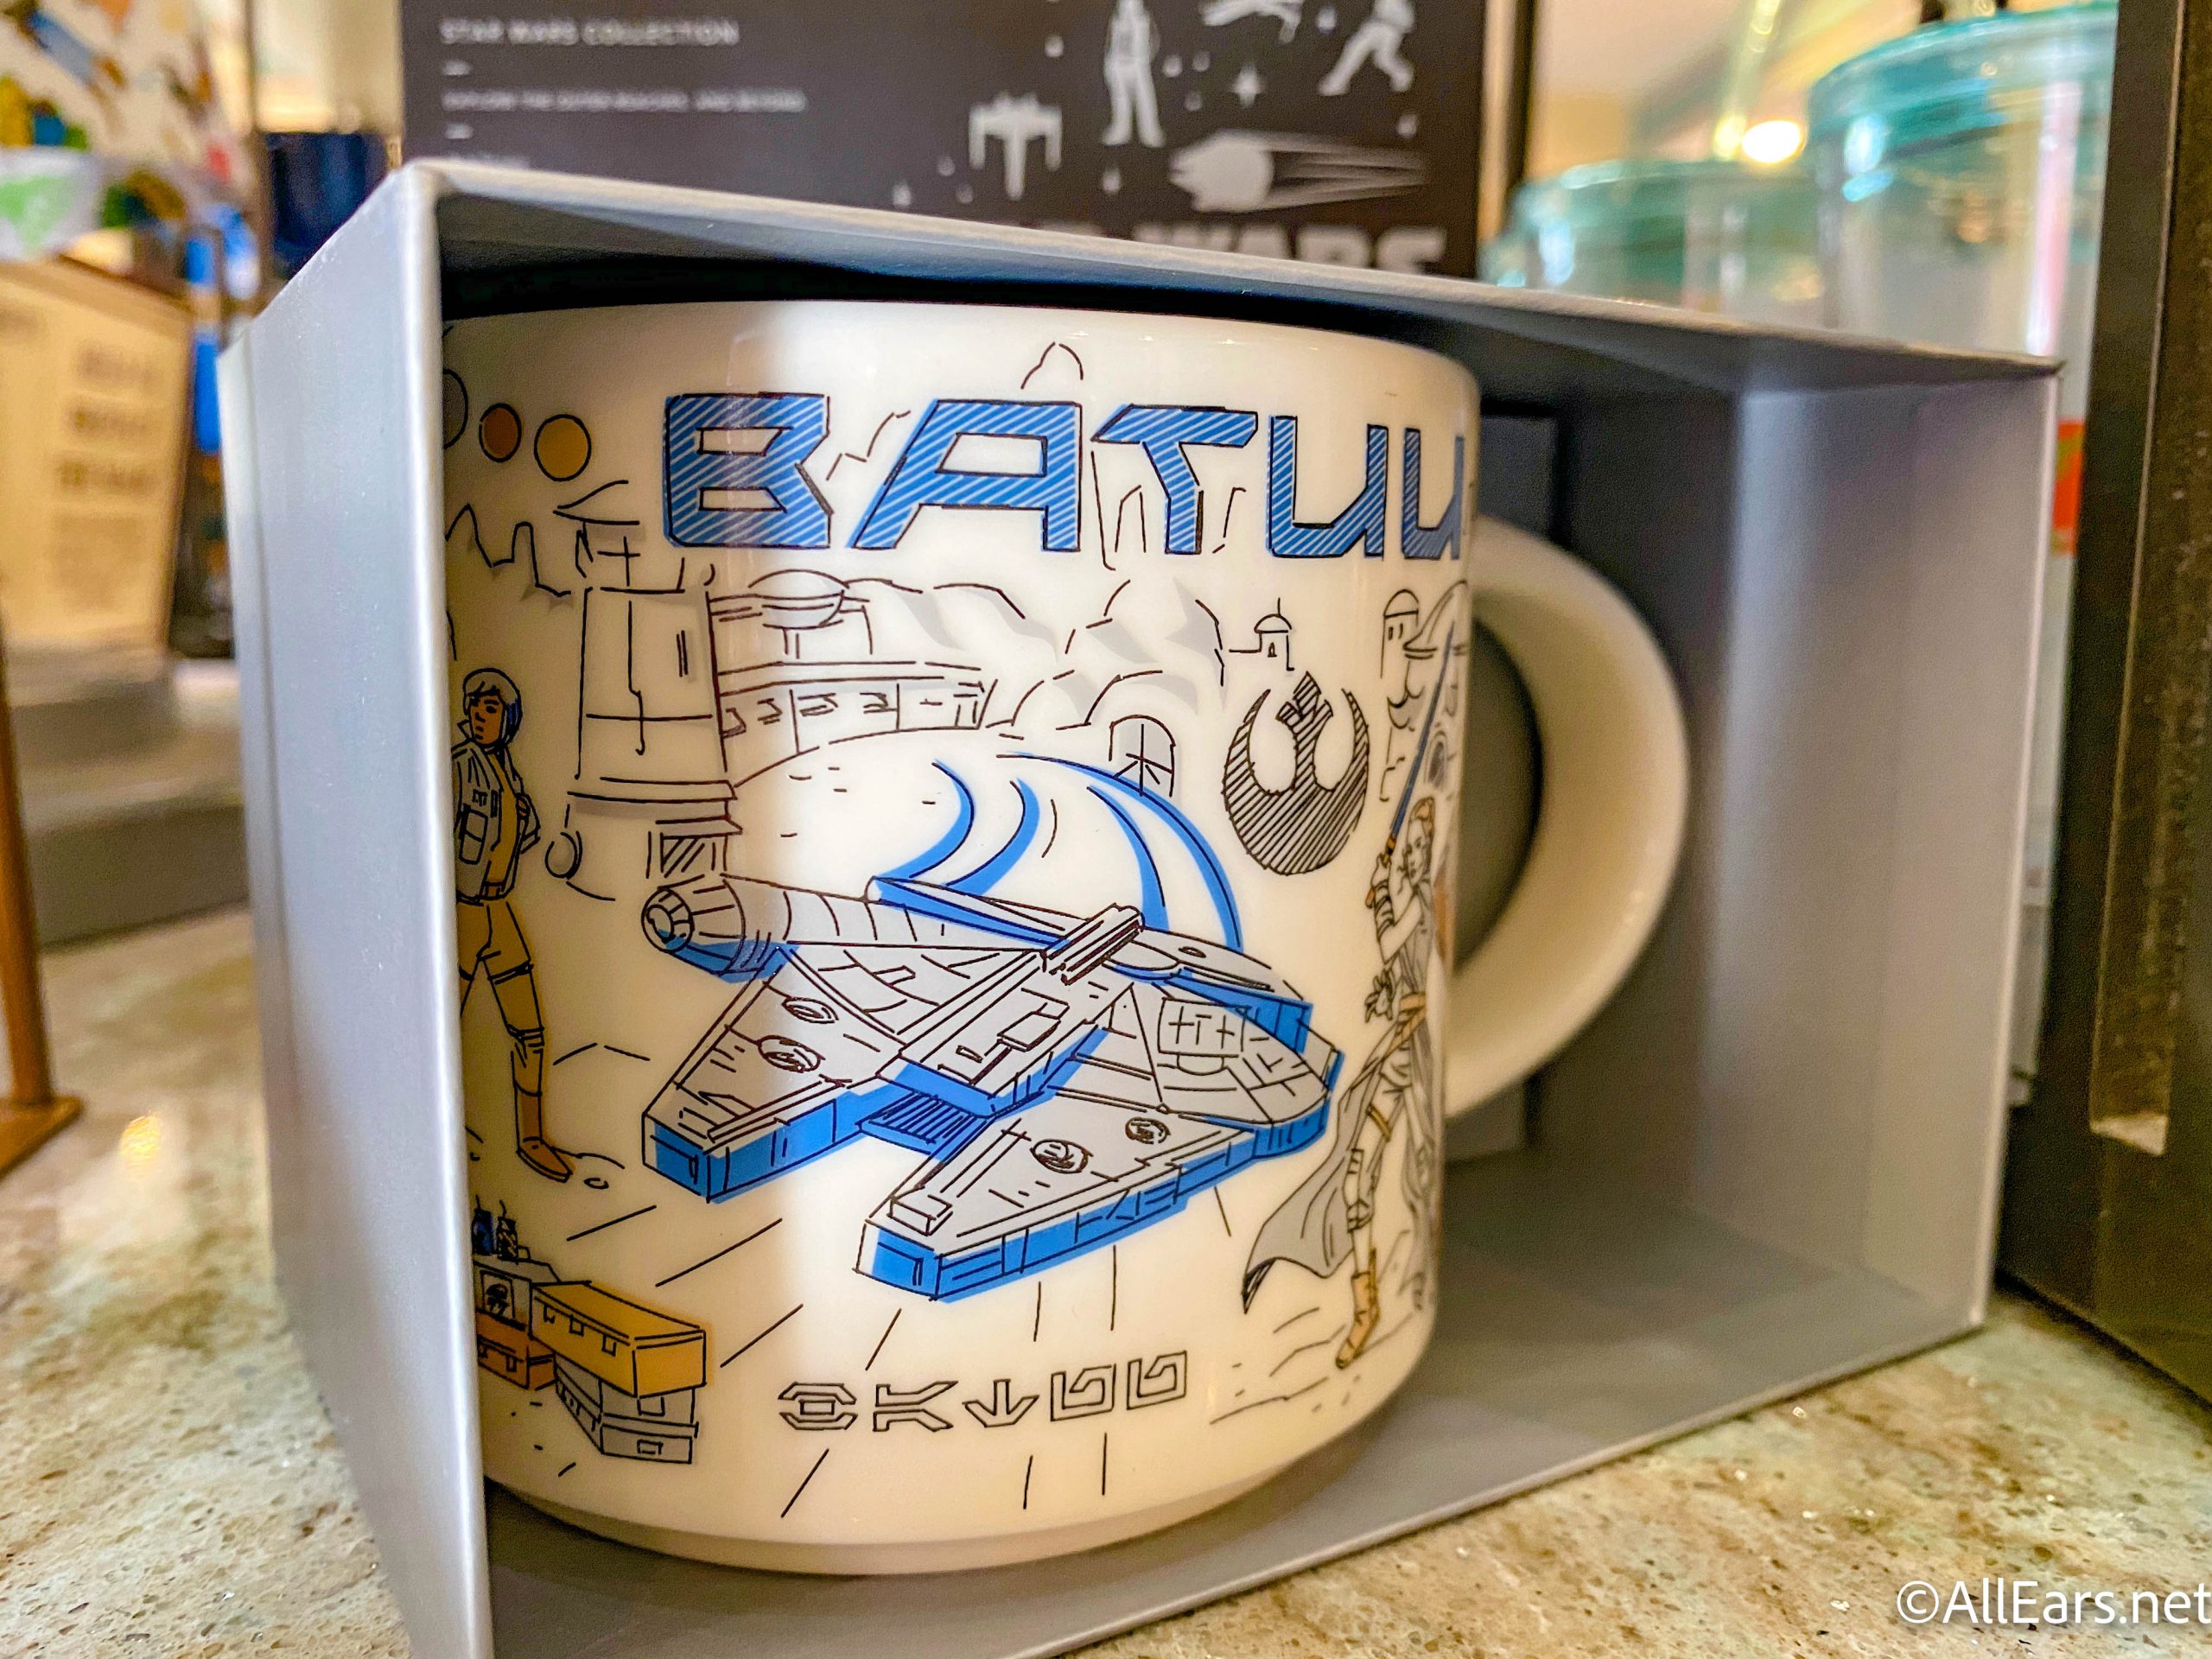 https://allears.net/wp-content/uploads/2021/05/wdw-2021-hollywood-studios-starbucks-star-wars-been-there-mugs-planets-tatooine-batuu-8-scaled.jpg